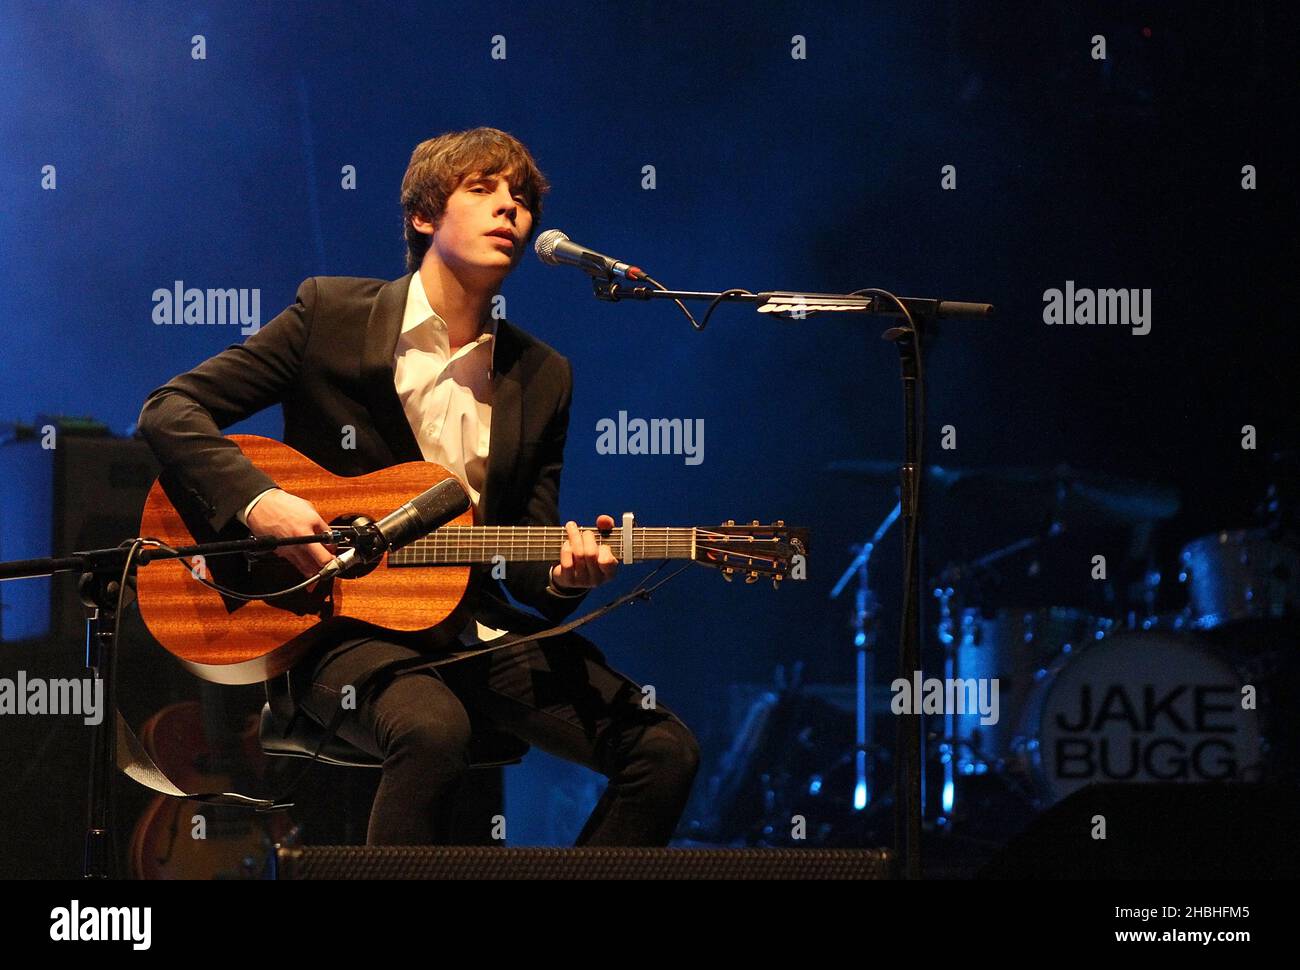 Jake Bugg performs at The Royal Albert Hall in London.. Stock Photo